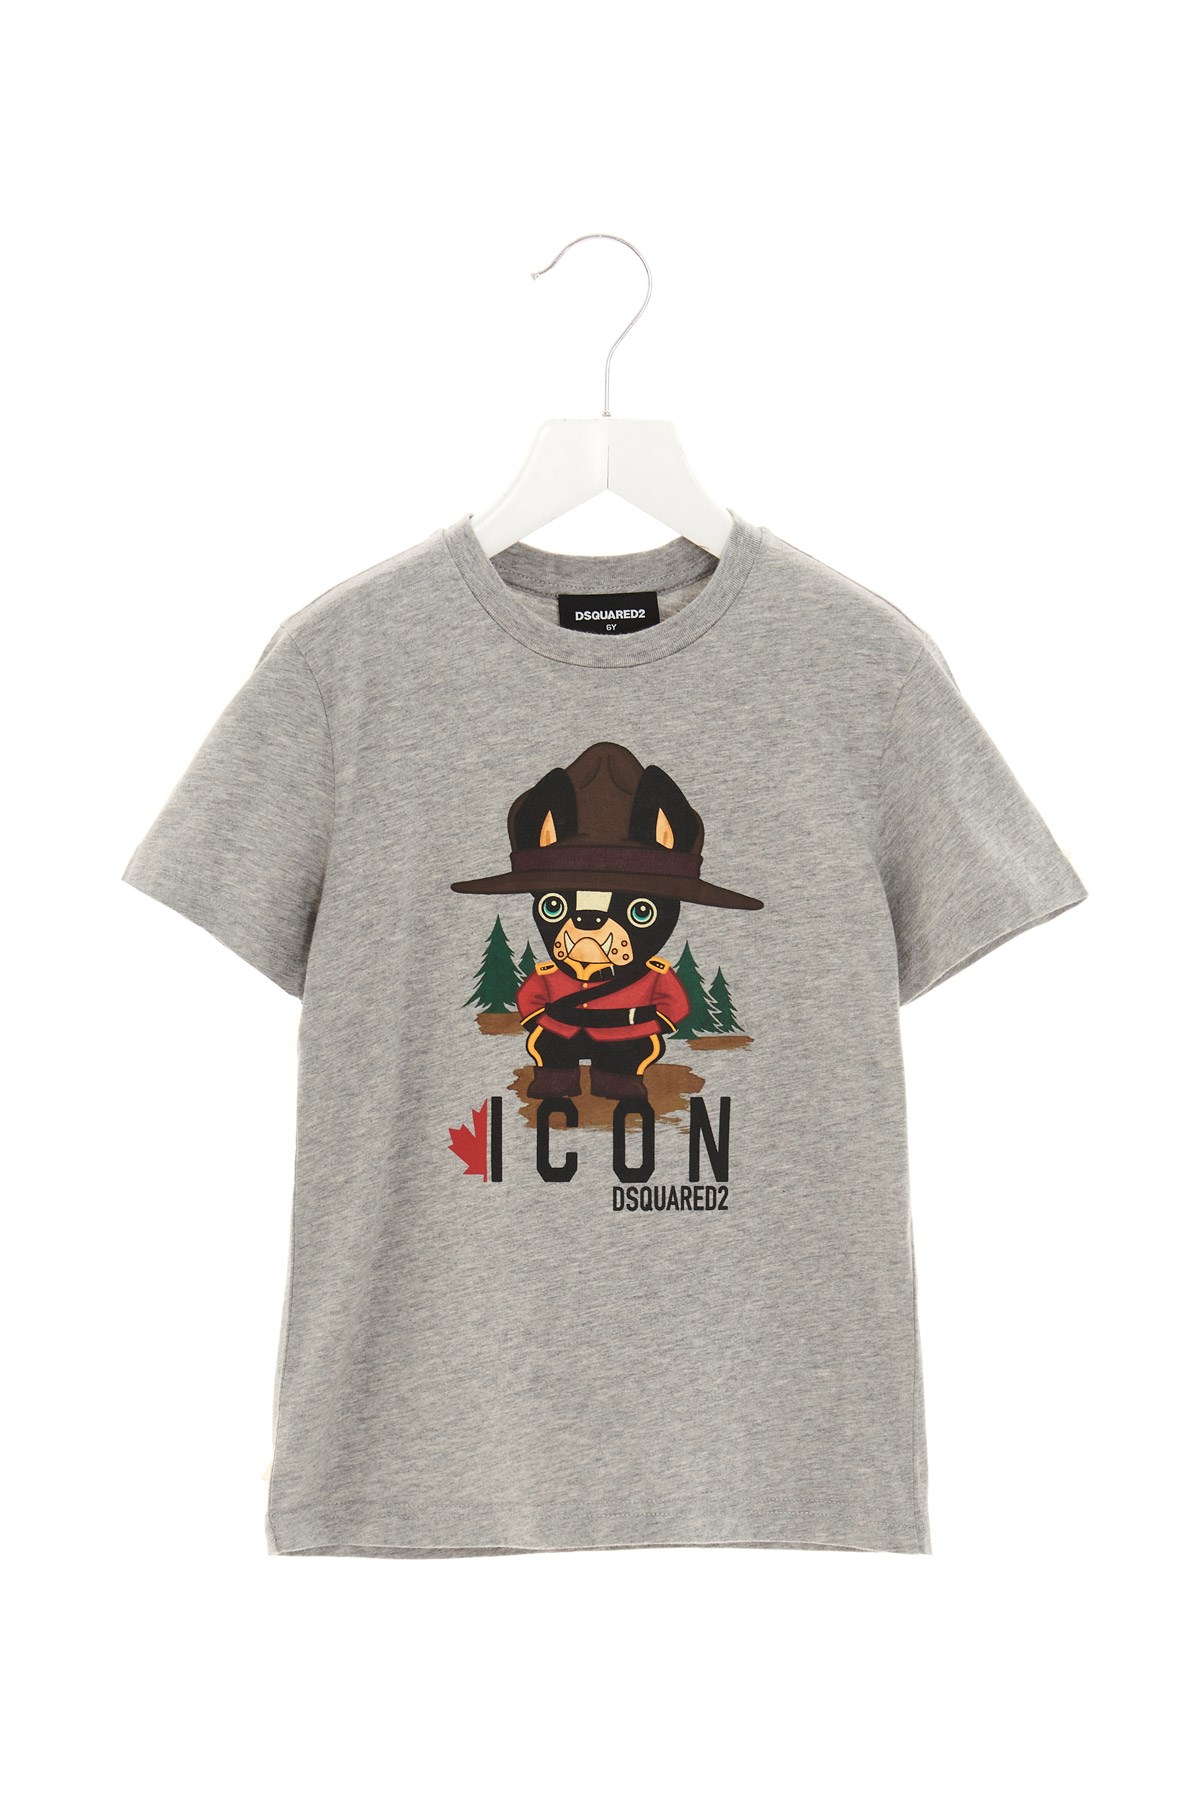 DSQUARED2 T-Shirt 'Icon'